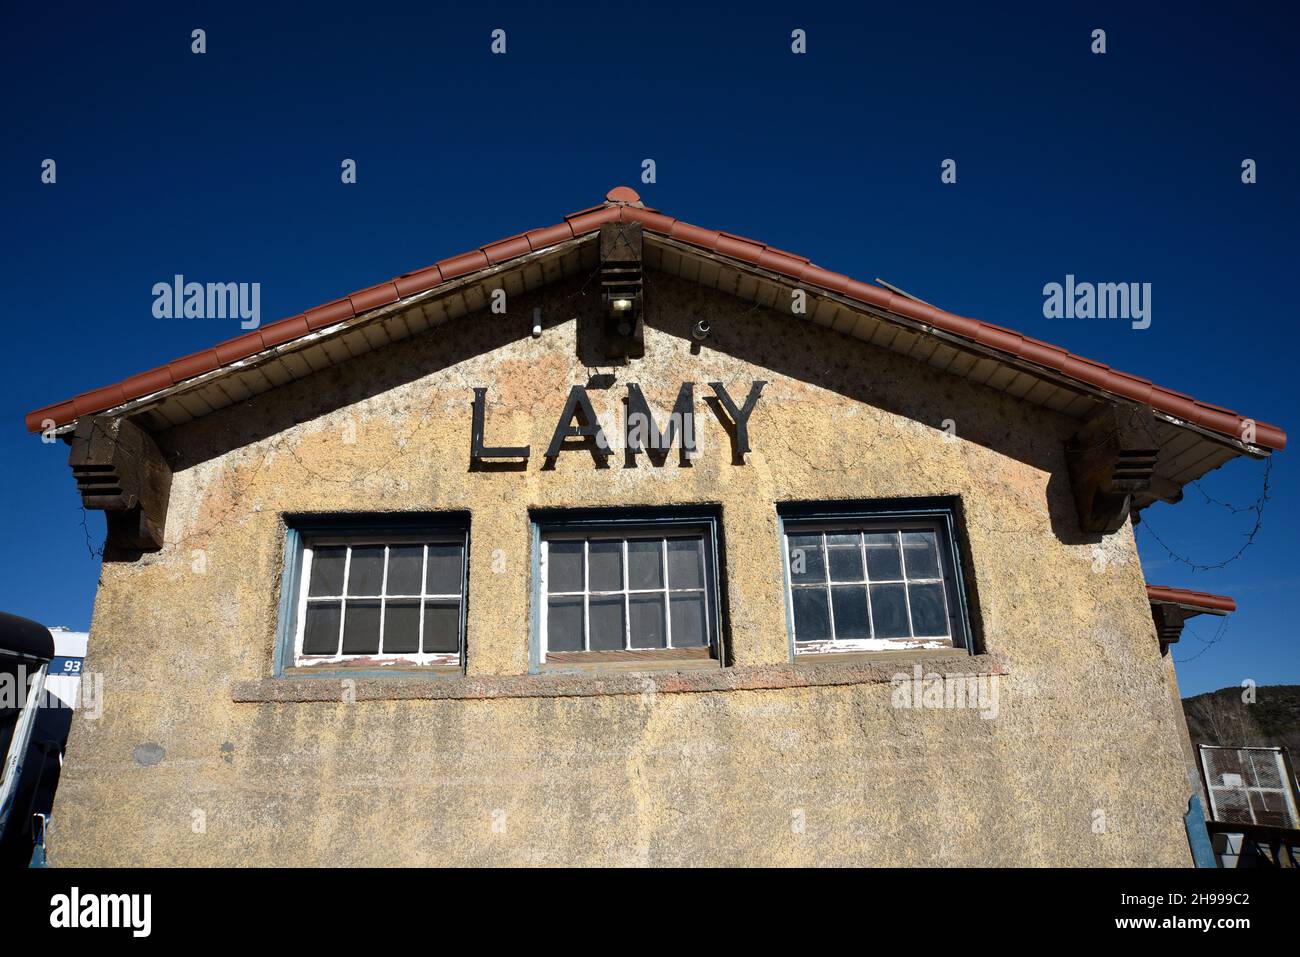 The Lamy train station in Lamy, New Mexico, was built in 1909. The station is a daily stop for the Southwest Chief passenger train operated by Amtrak Stock Photo